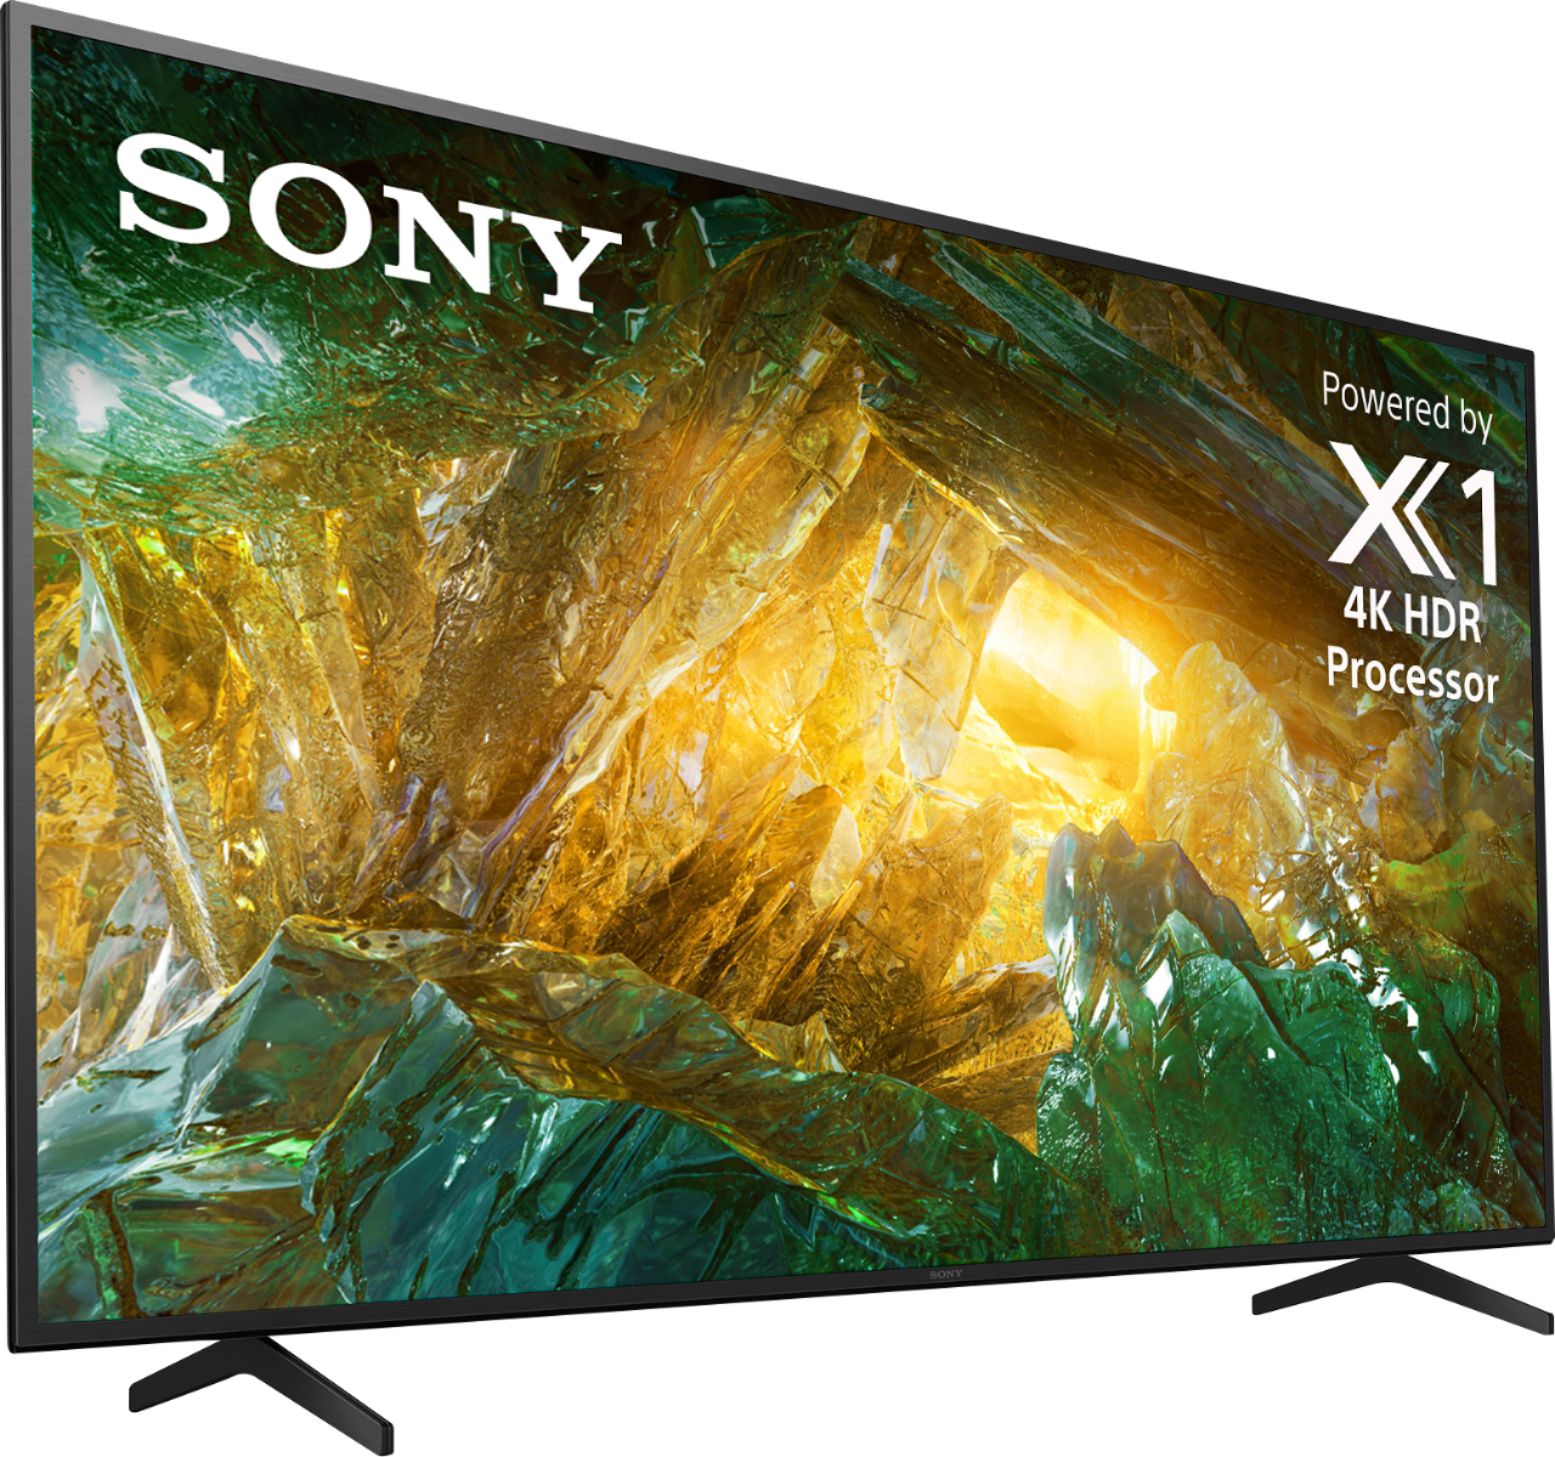 Angle View: Sony - 75" Class XBR X800H Series LED 4K UHD Smart Android TV